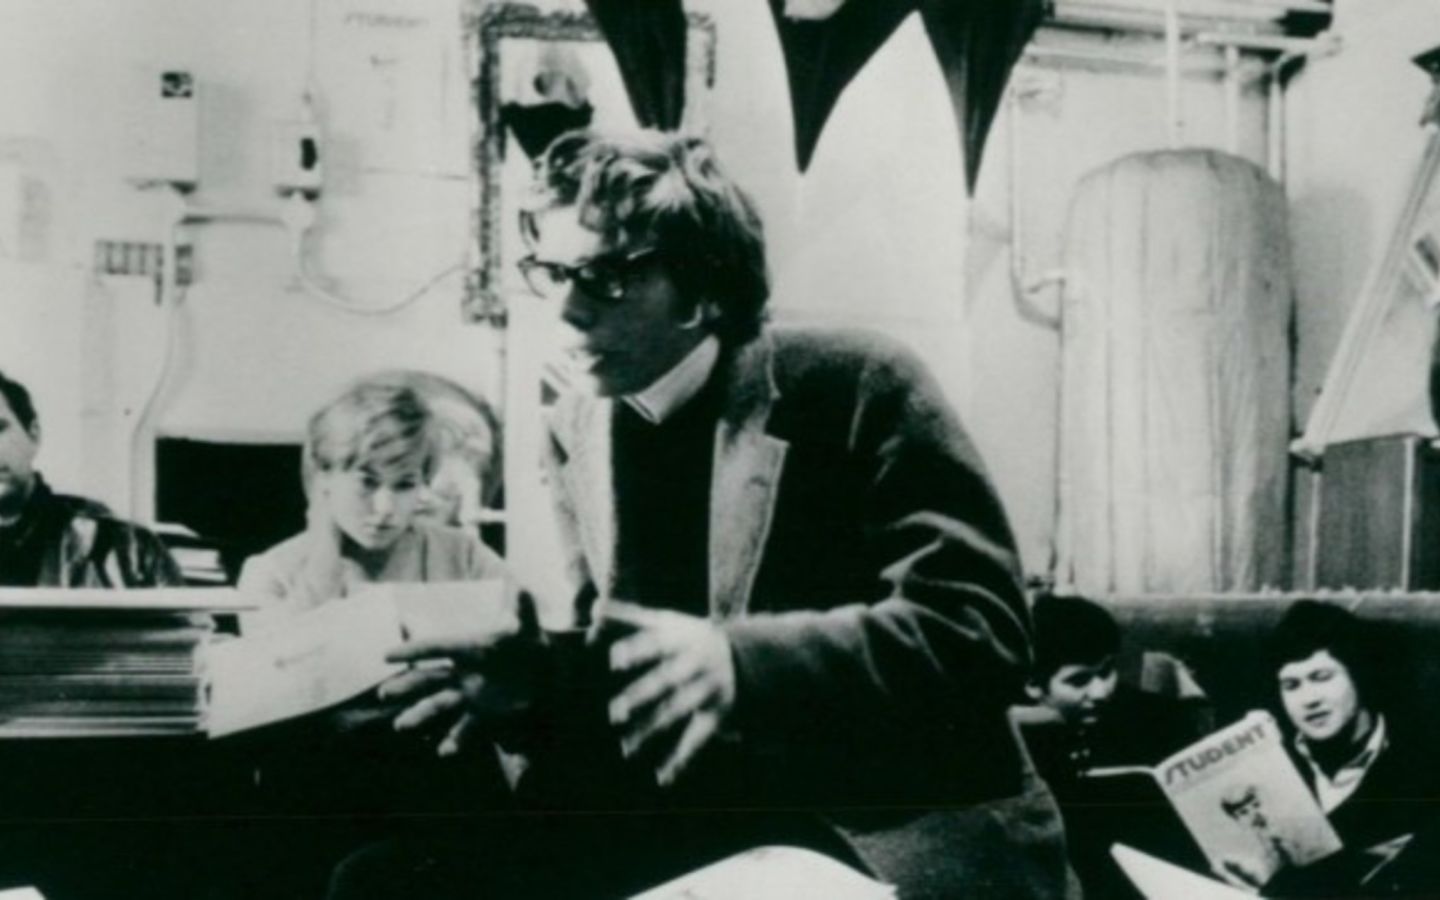 A very young Richard Branson speaking to his fellow colleagues 